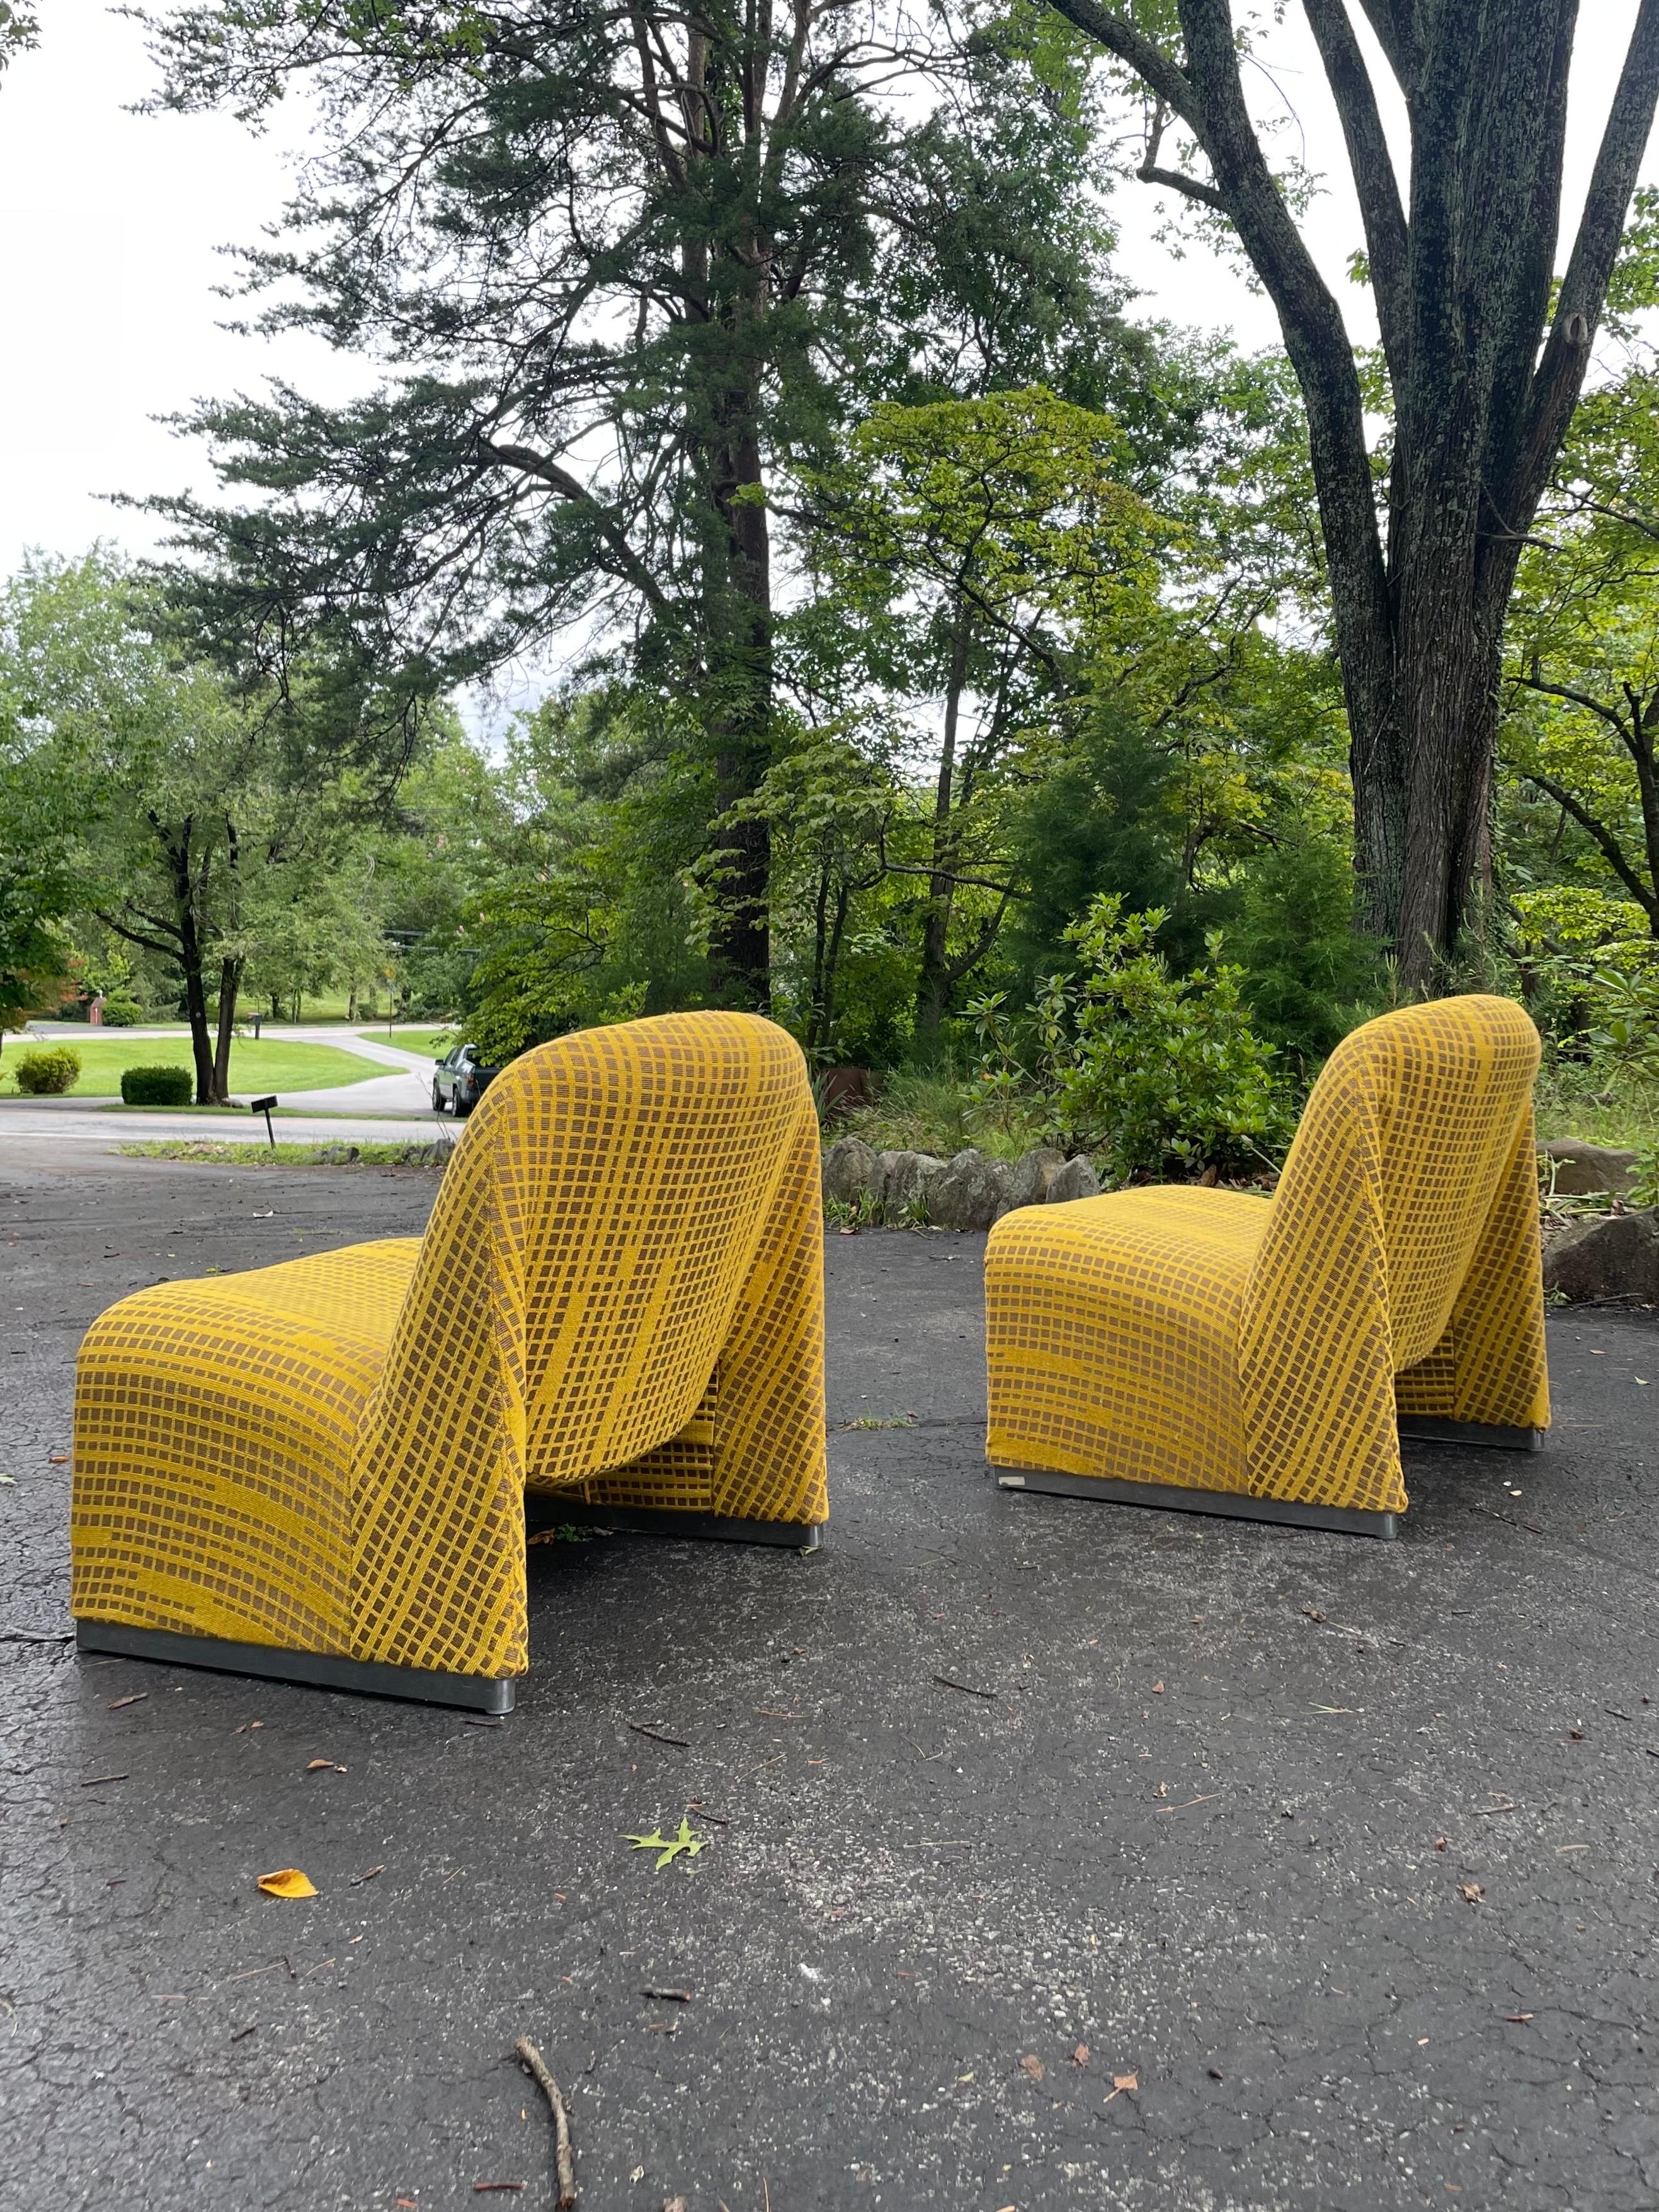 These iconic 'Alky' lounges were designed by Giancarlo Piretti for Anonima Castelli in the late 1970s. The lounges are known for their comfortable seating and iconic Italian design. They are upholstered in an interesting but also neutral yellow and